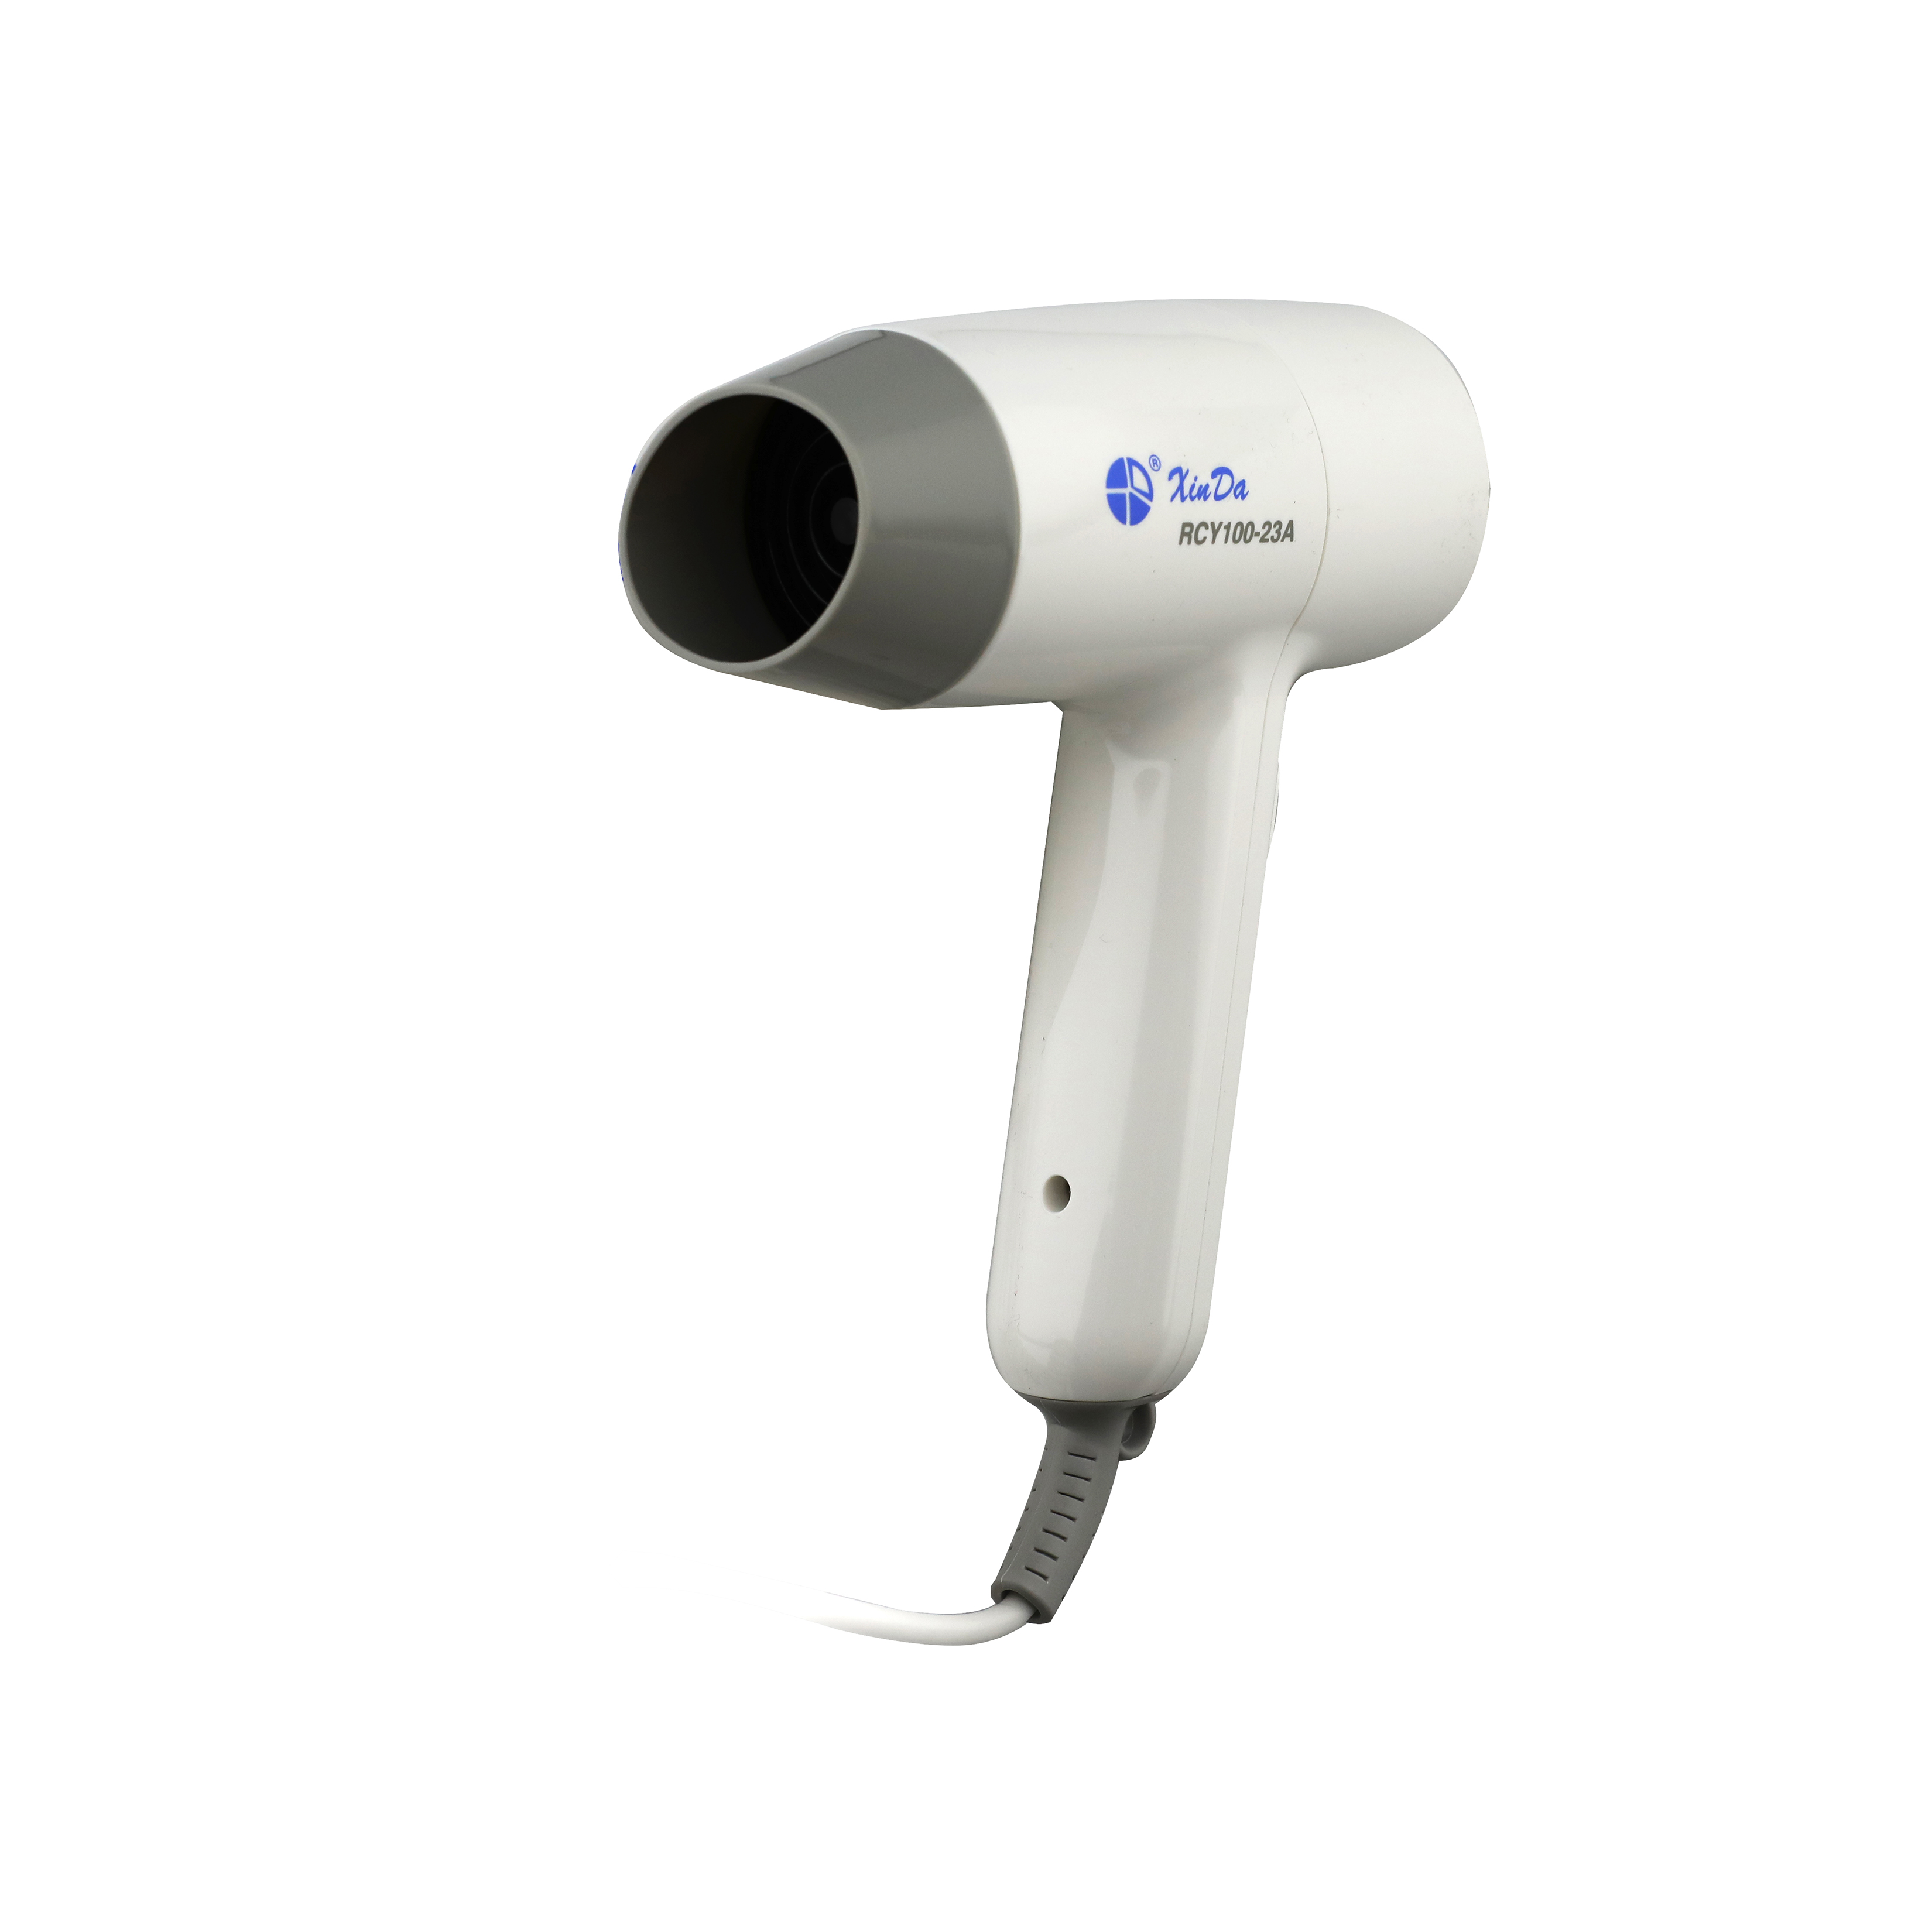 ABS Plastic Hair Dryer For Hotel Bathroom Wall-Mounted Professional Hair Dryer CXINDA RCY-100 23A